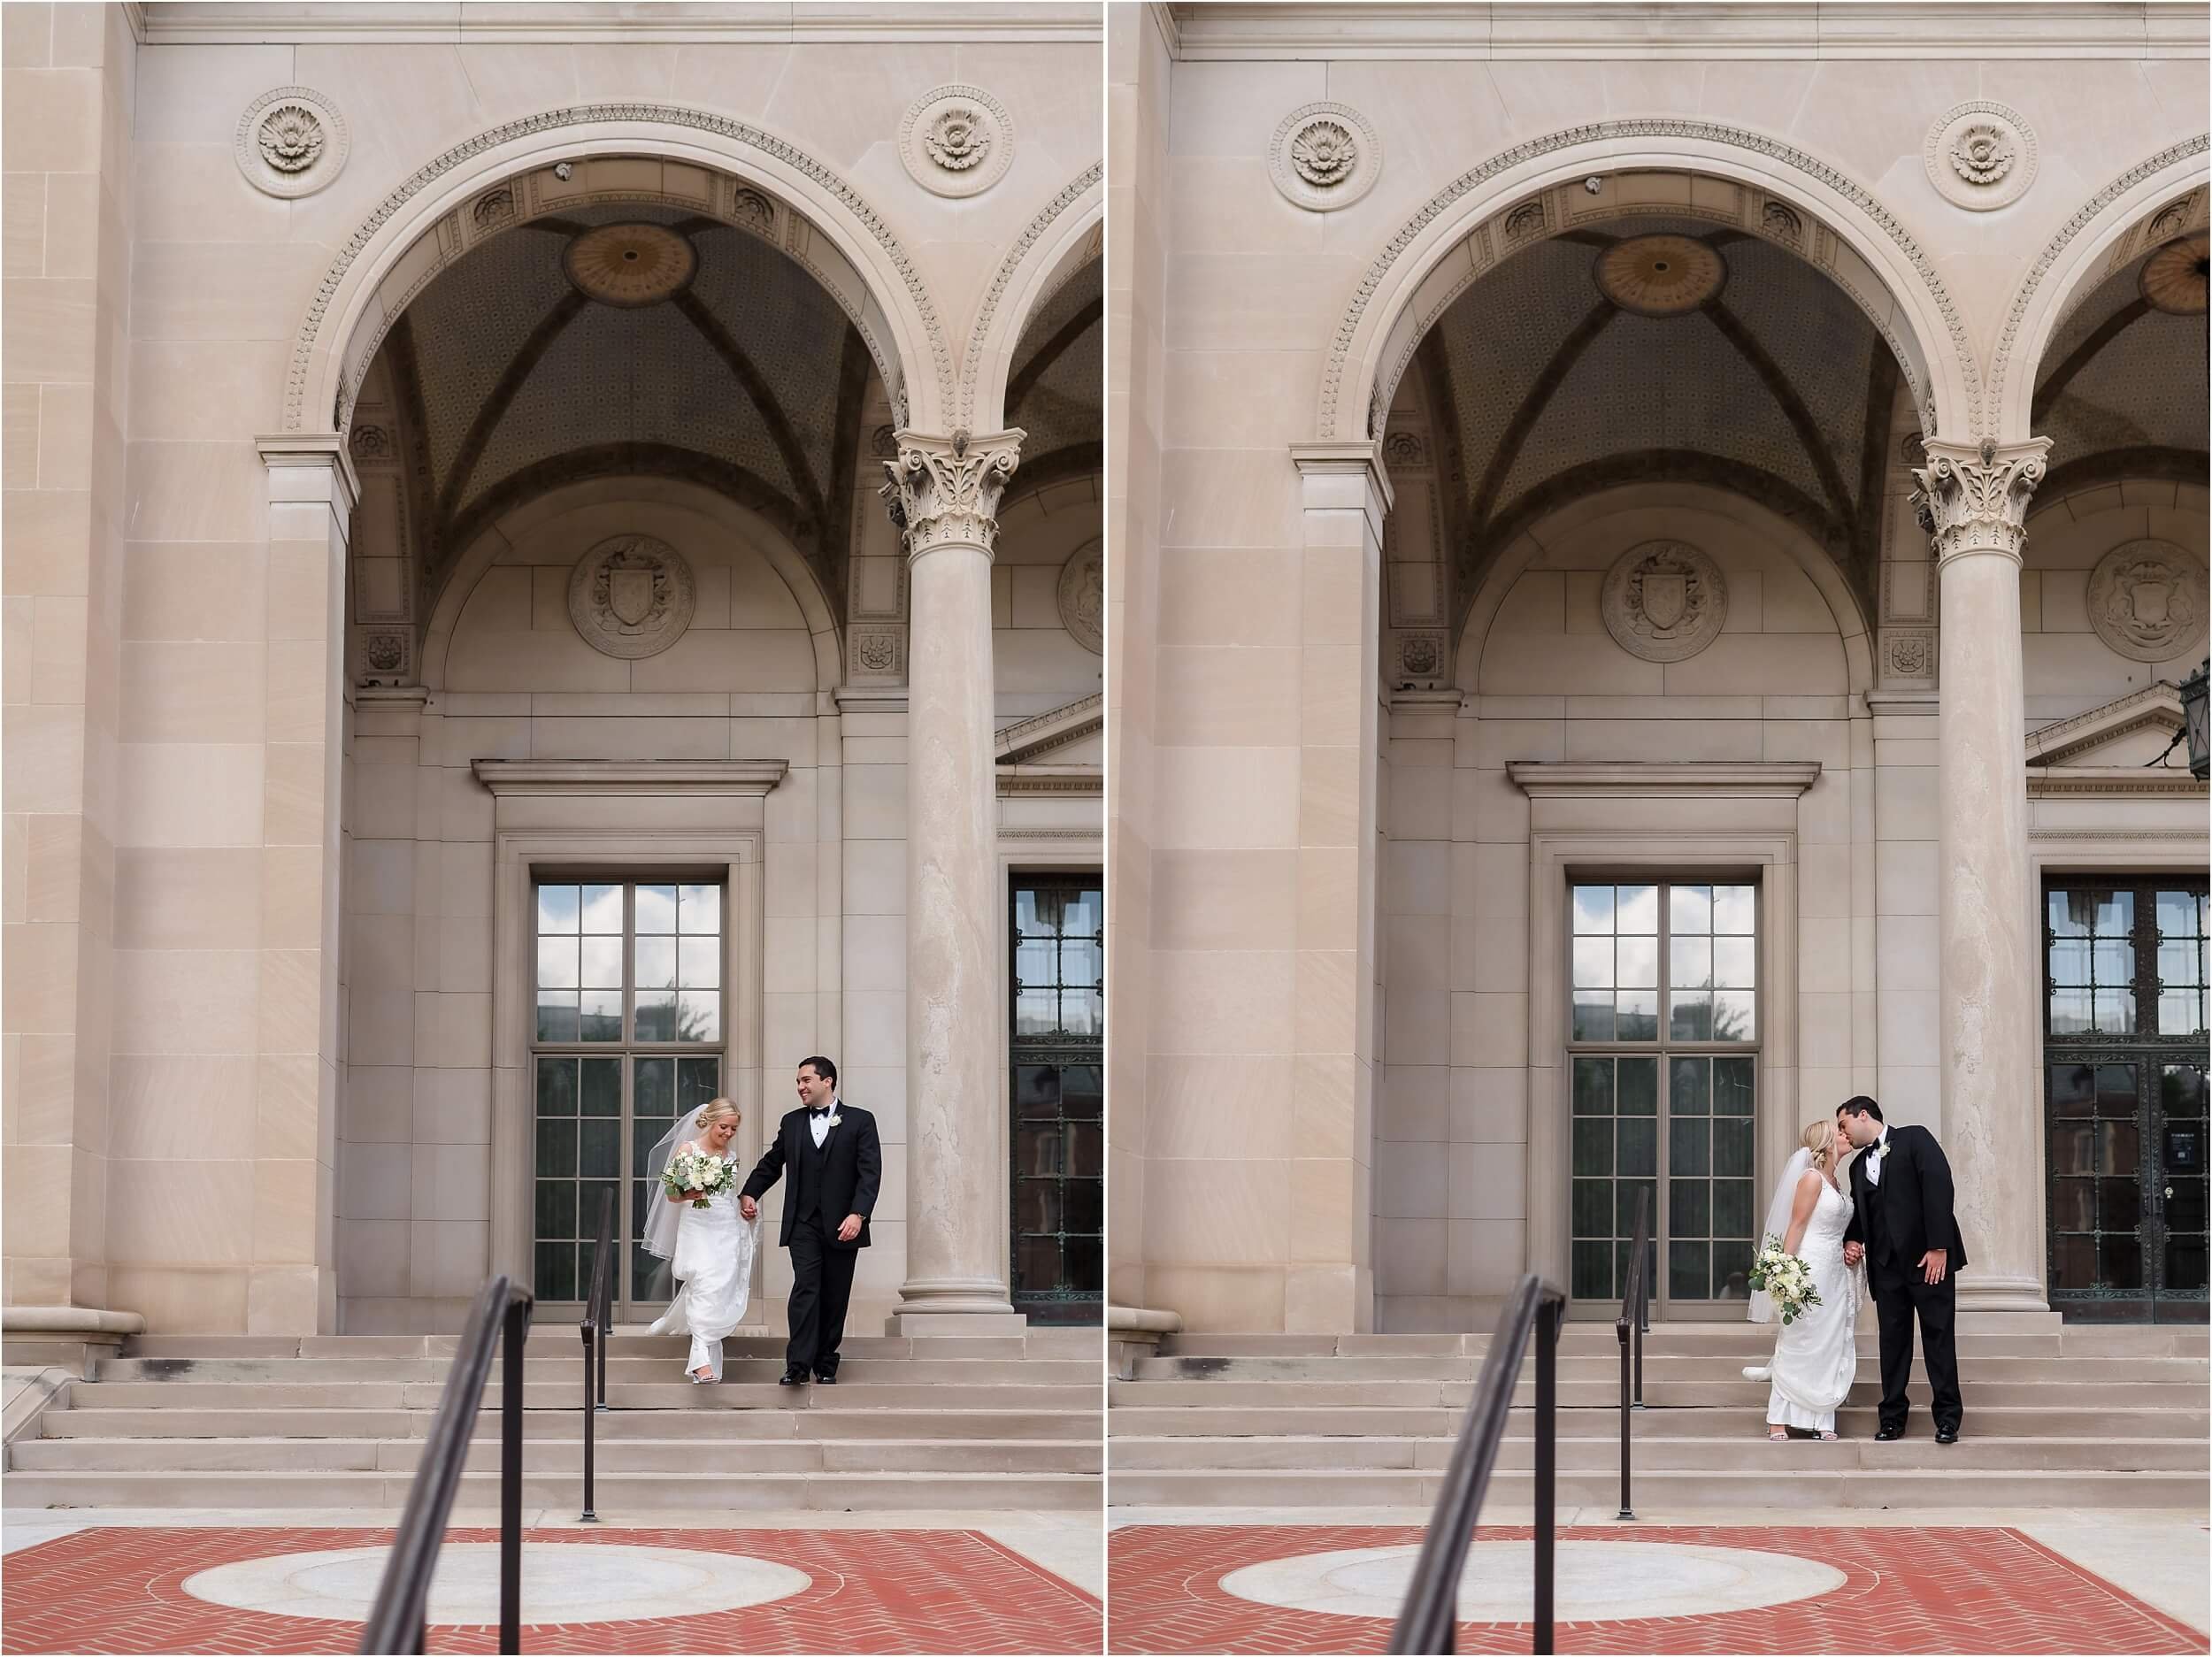  A couple walks down the stairs at Clements Library on U of M’s campus.  